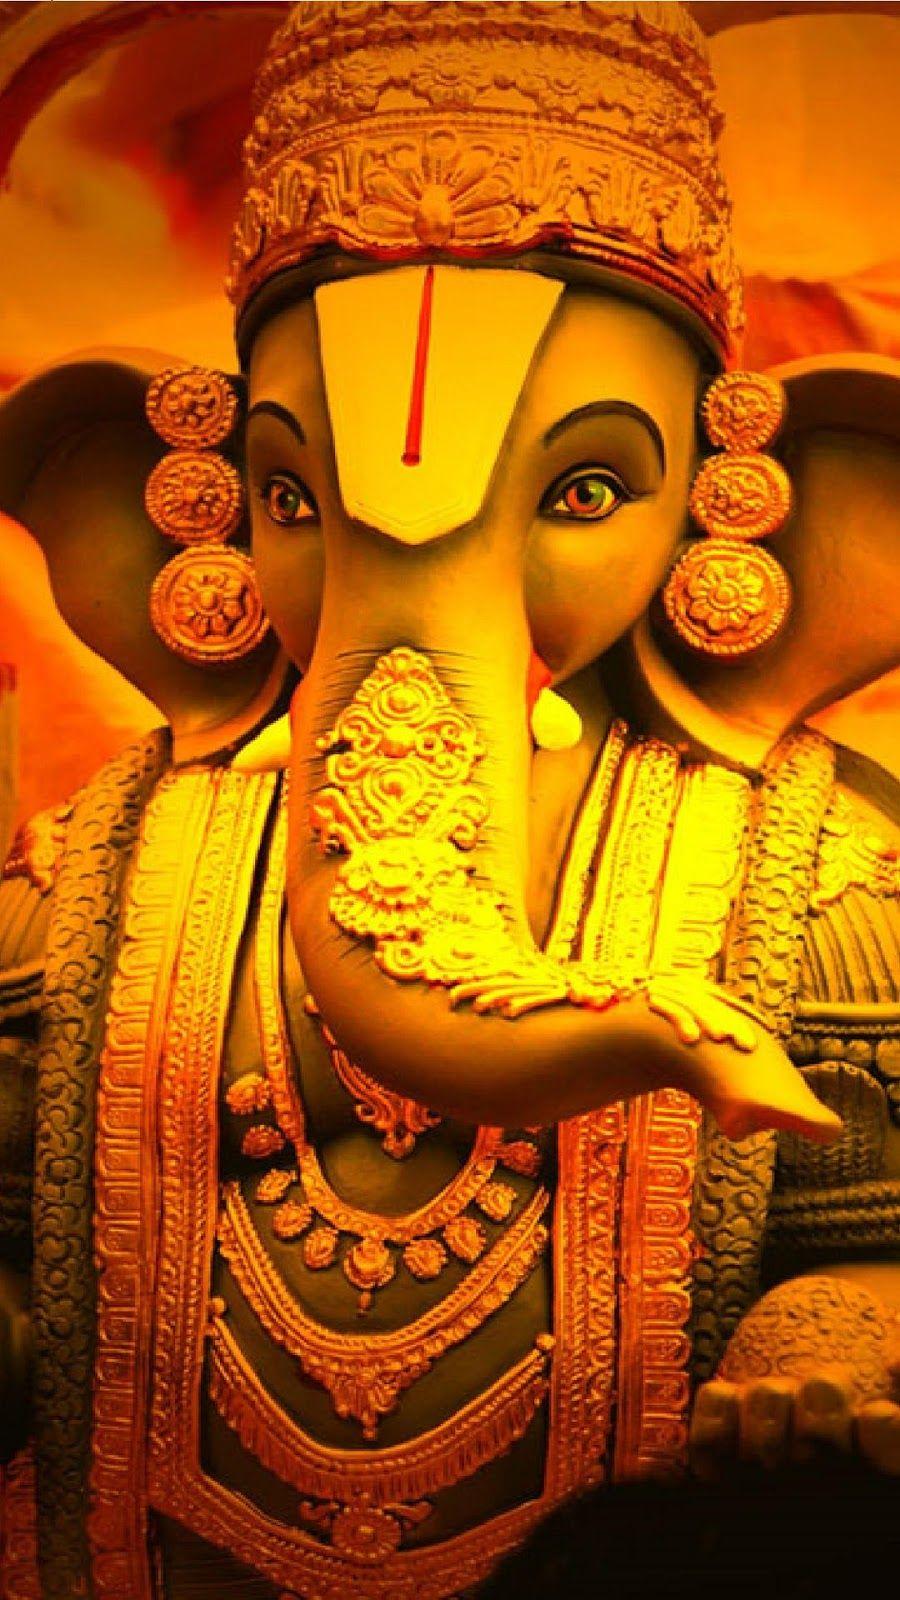 1080P Ganesh Hd Wallpapers For Mobile / River flowing wallpaper for